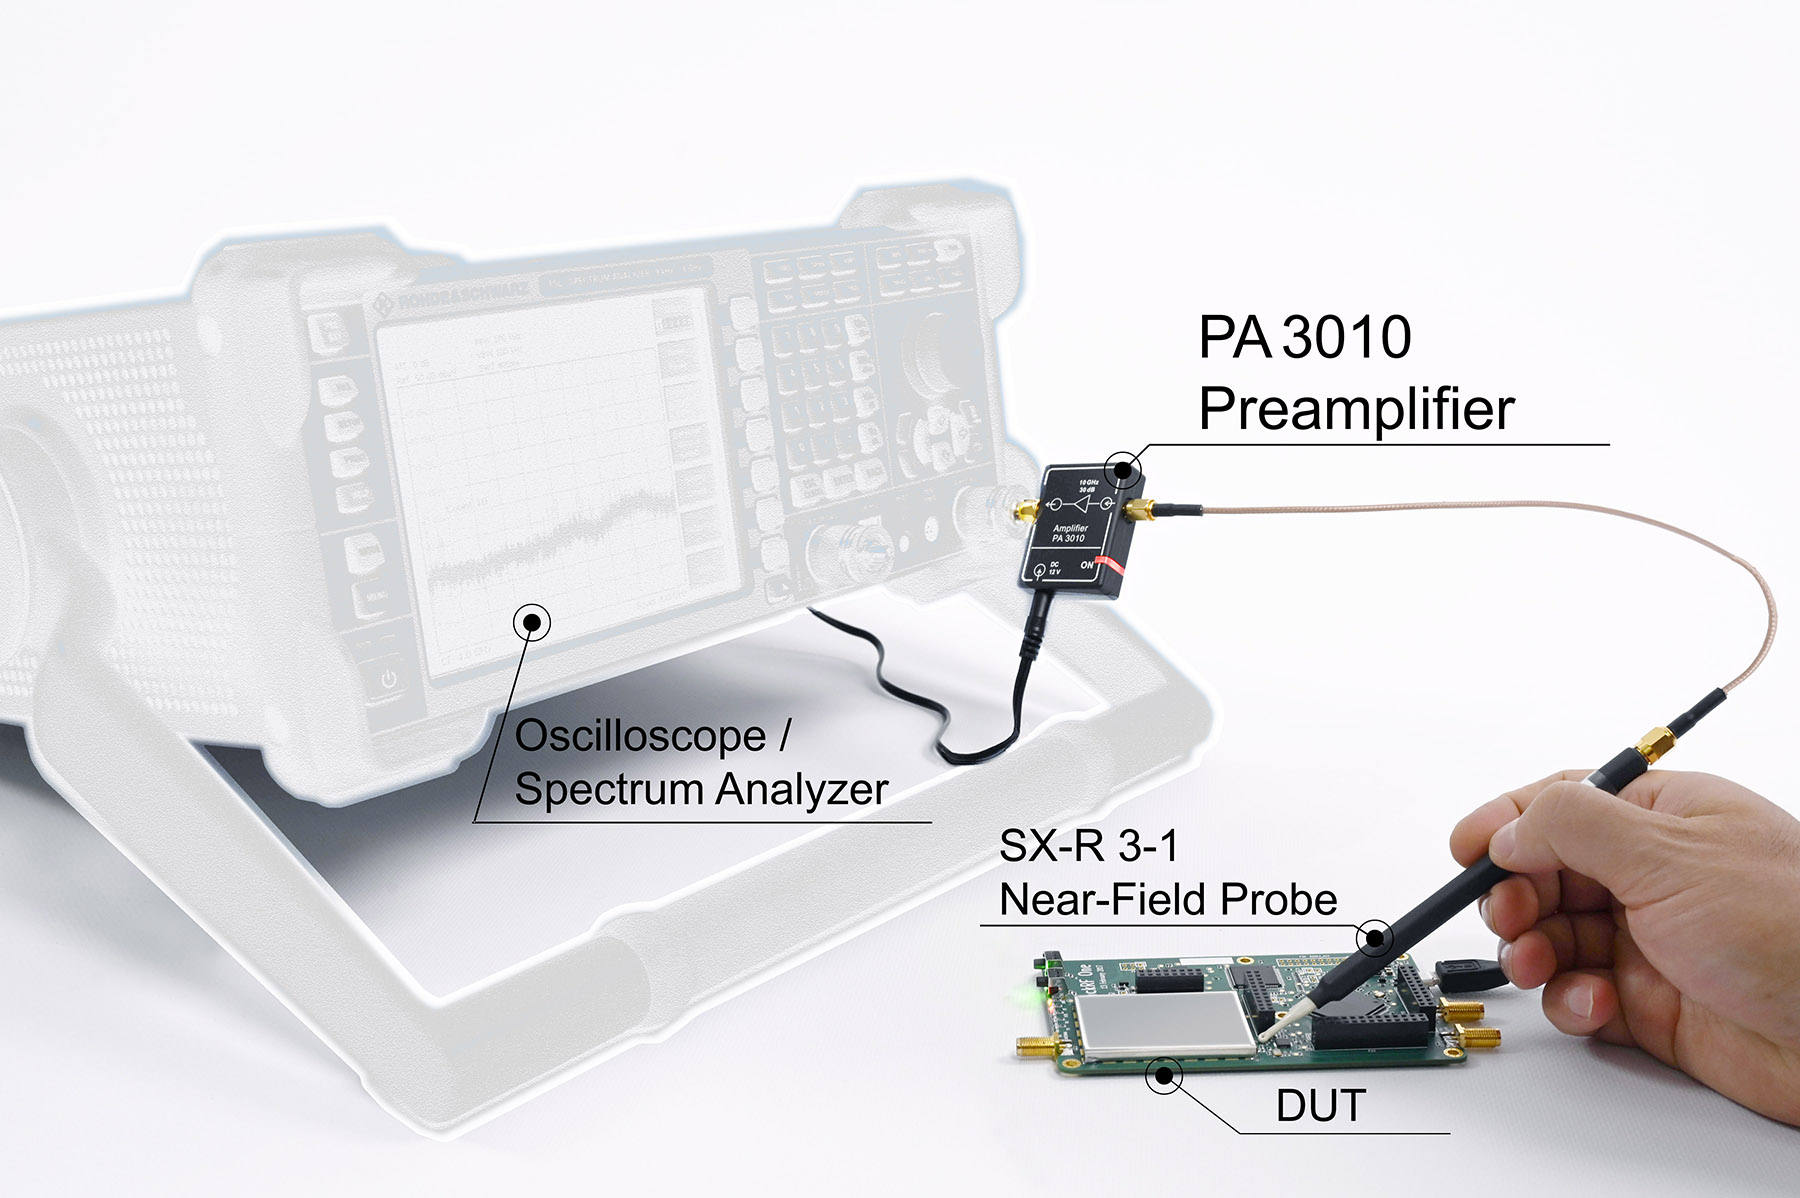 Measurement set-up with PA 3010